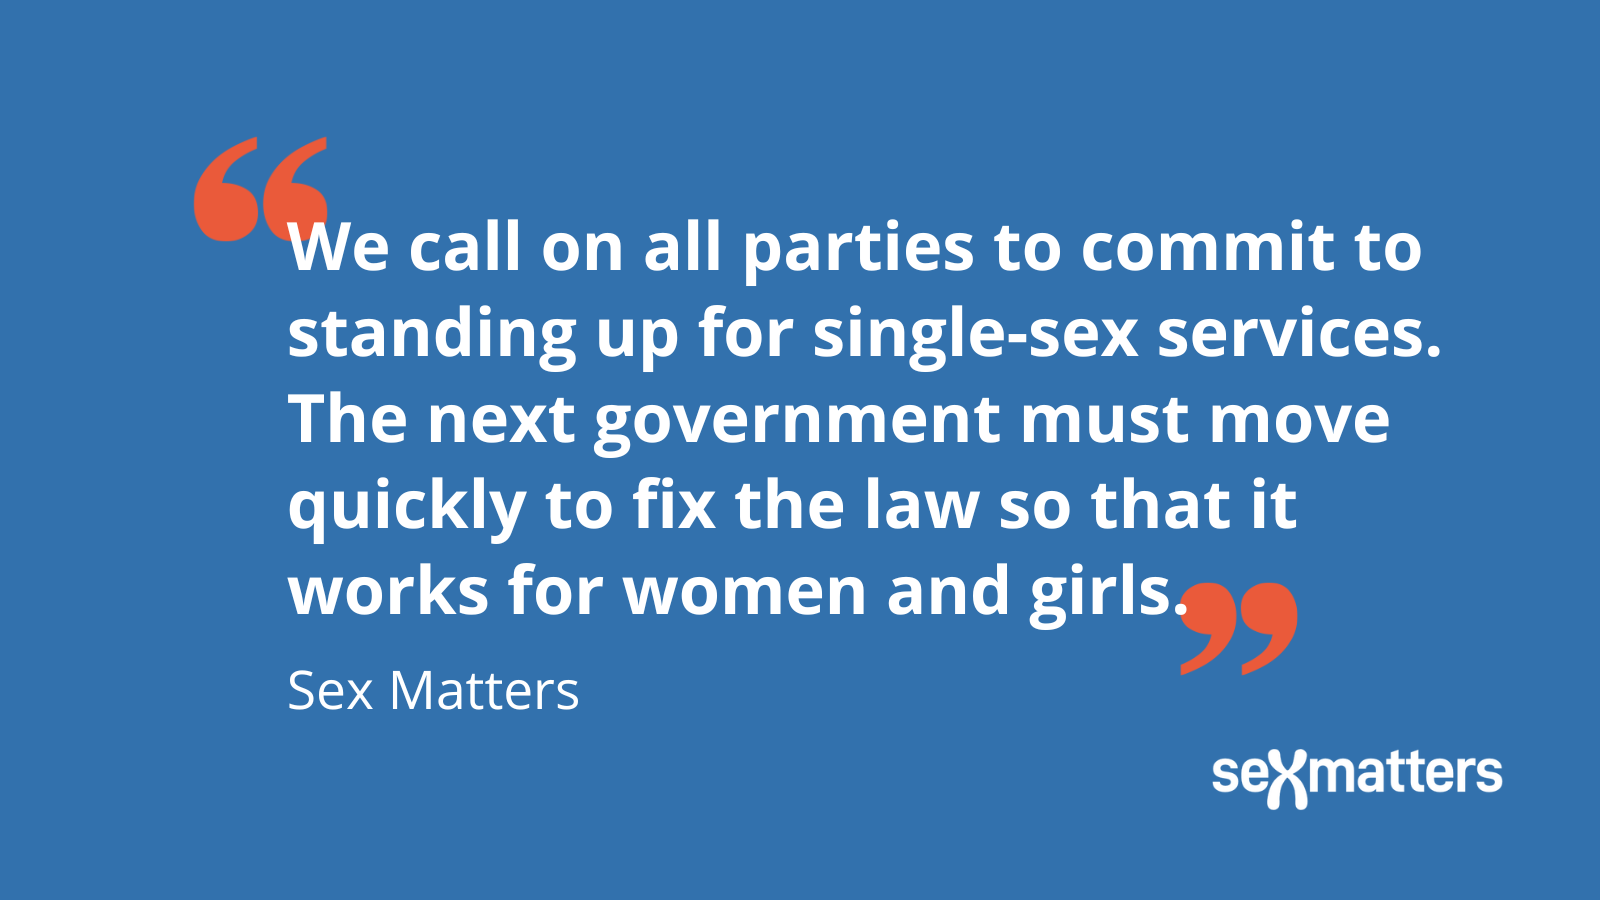 We call on all parties to commit to standing up for single-sex services. The next government must move quickly to fix the law so that it works for women and girls.